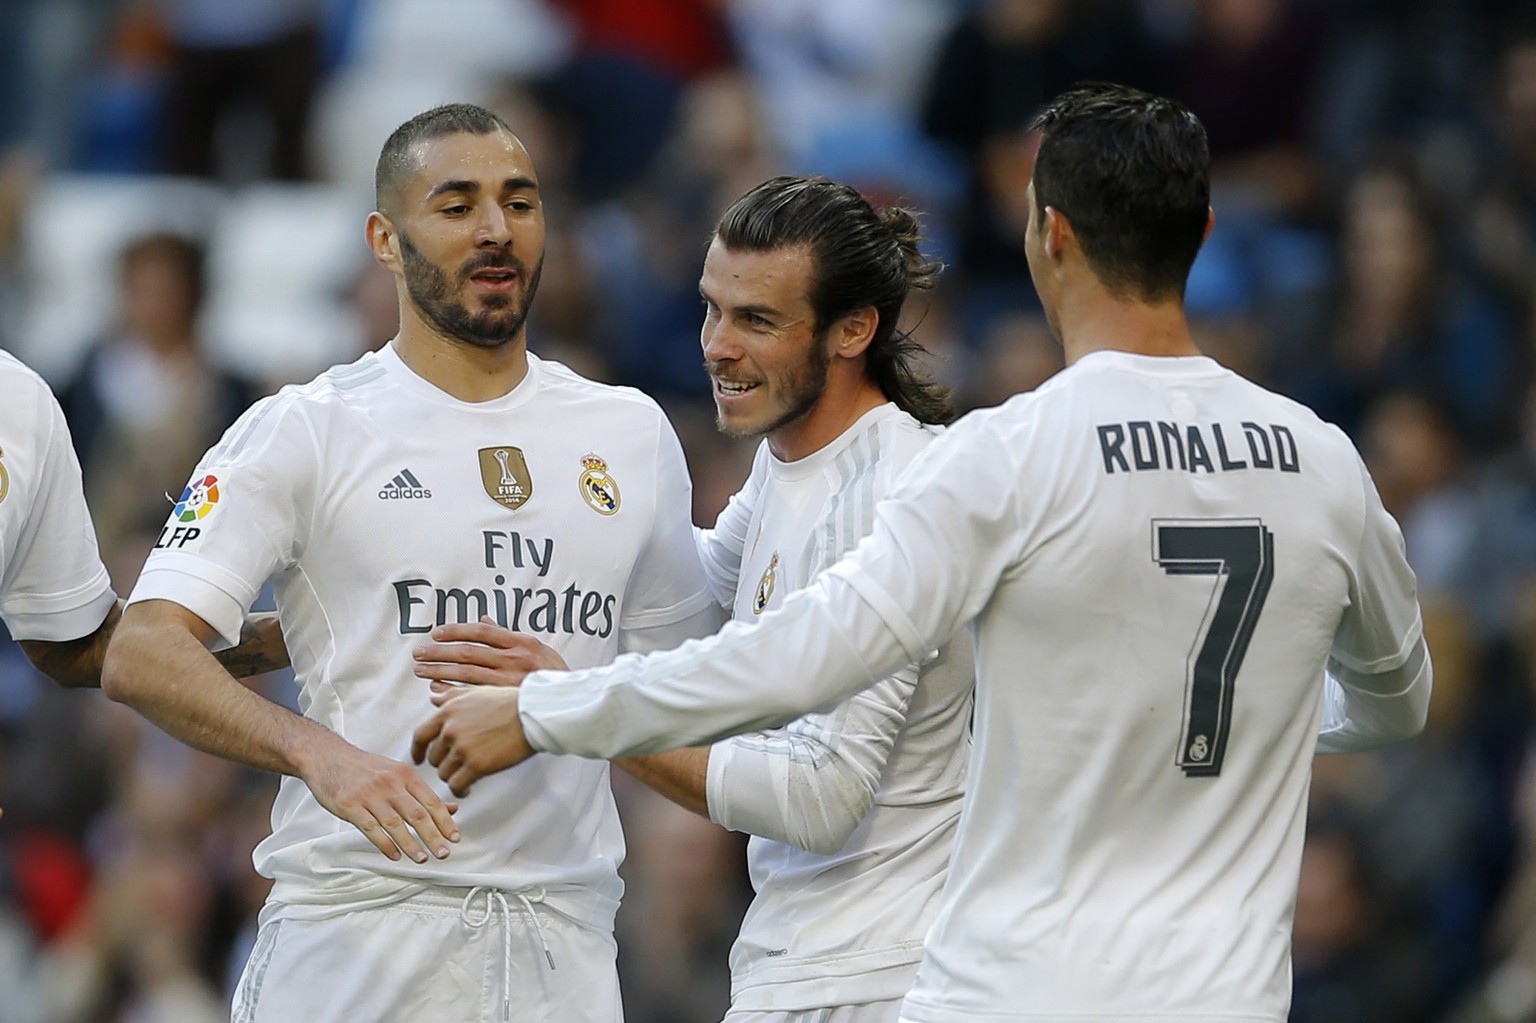 Real Madrid&#039;s Karim Benzema, left, celebrates with teammates Cristiano Ronaldo, right, and Gareth Bale after scoring their side&#039;s third goal against Getafe during the Spanish La Liga soccer  ...